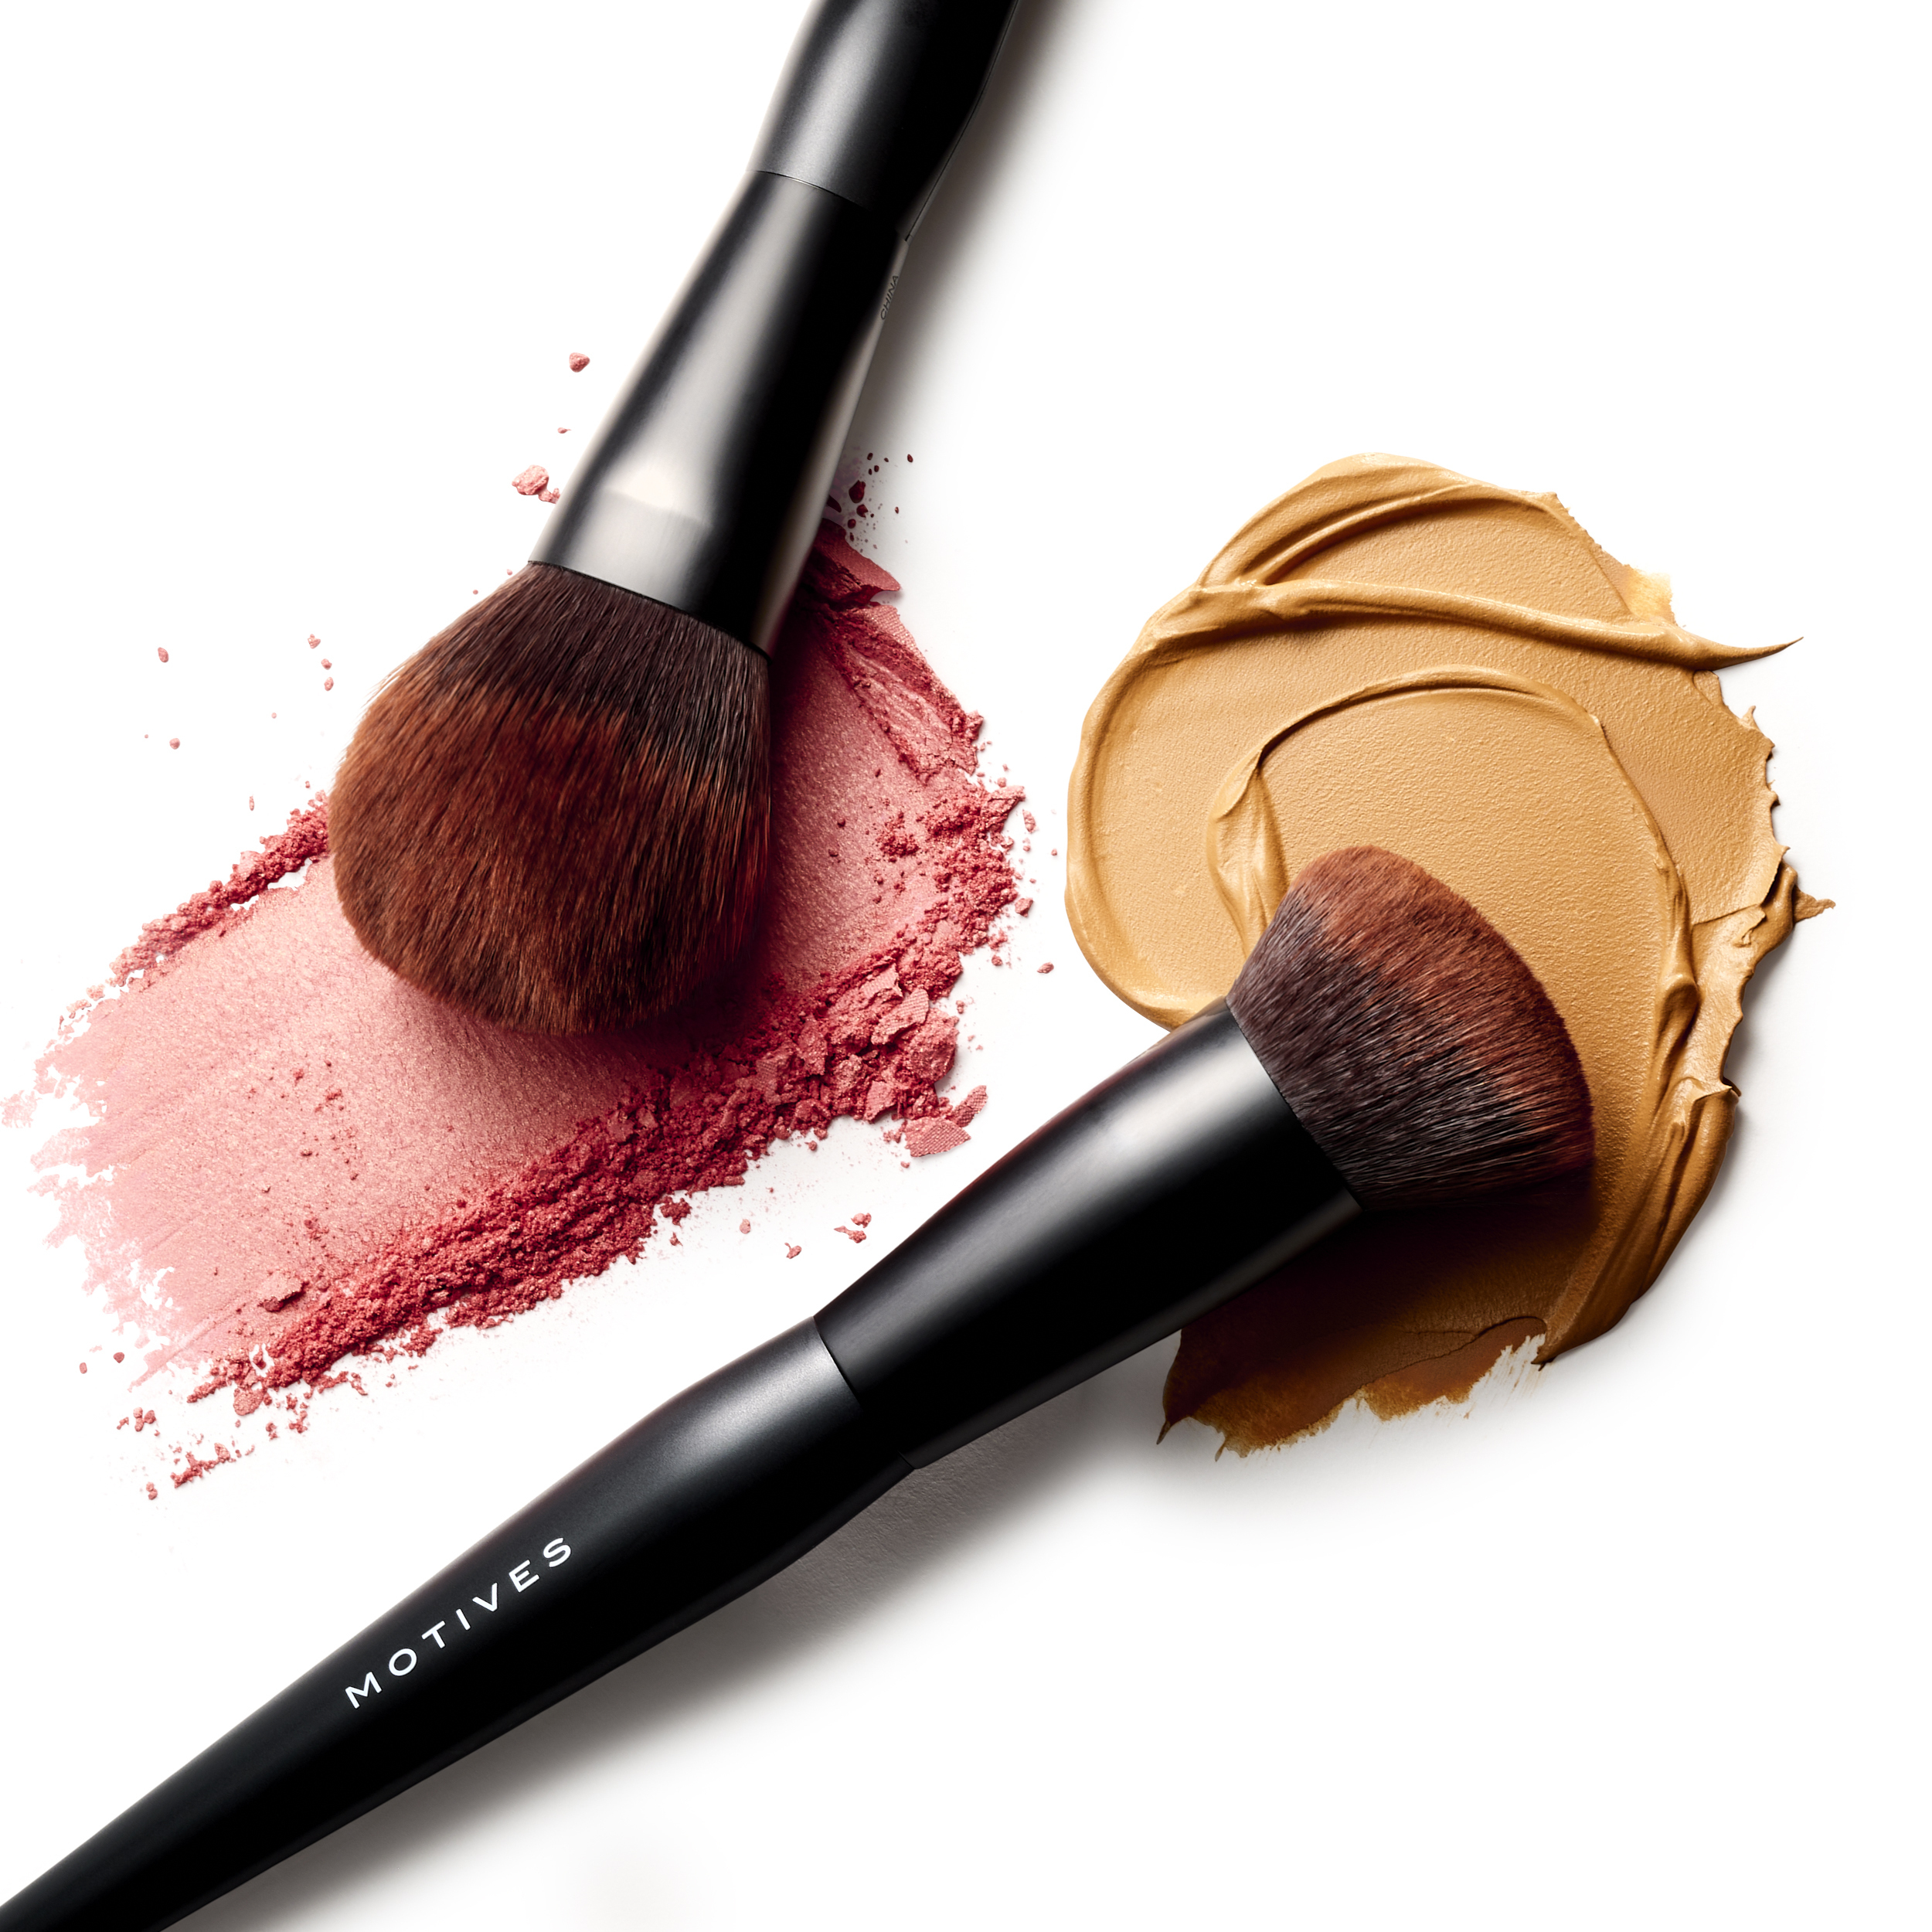 Powder brush and foundation brush from Motives Essential Complexion 4-Piece Brush Set shown with swatches of different textured cosmetics.